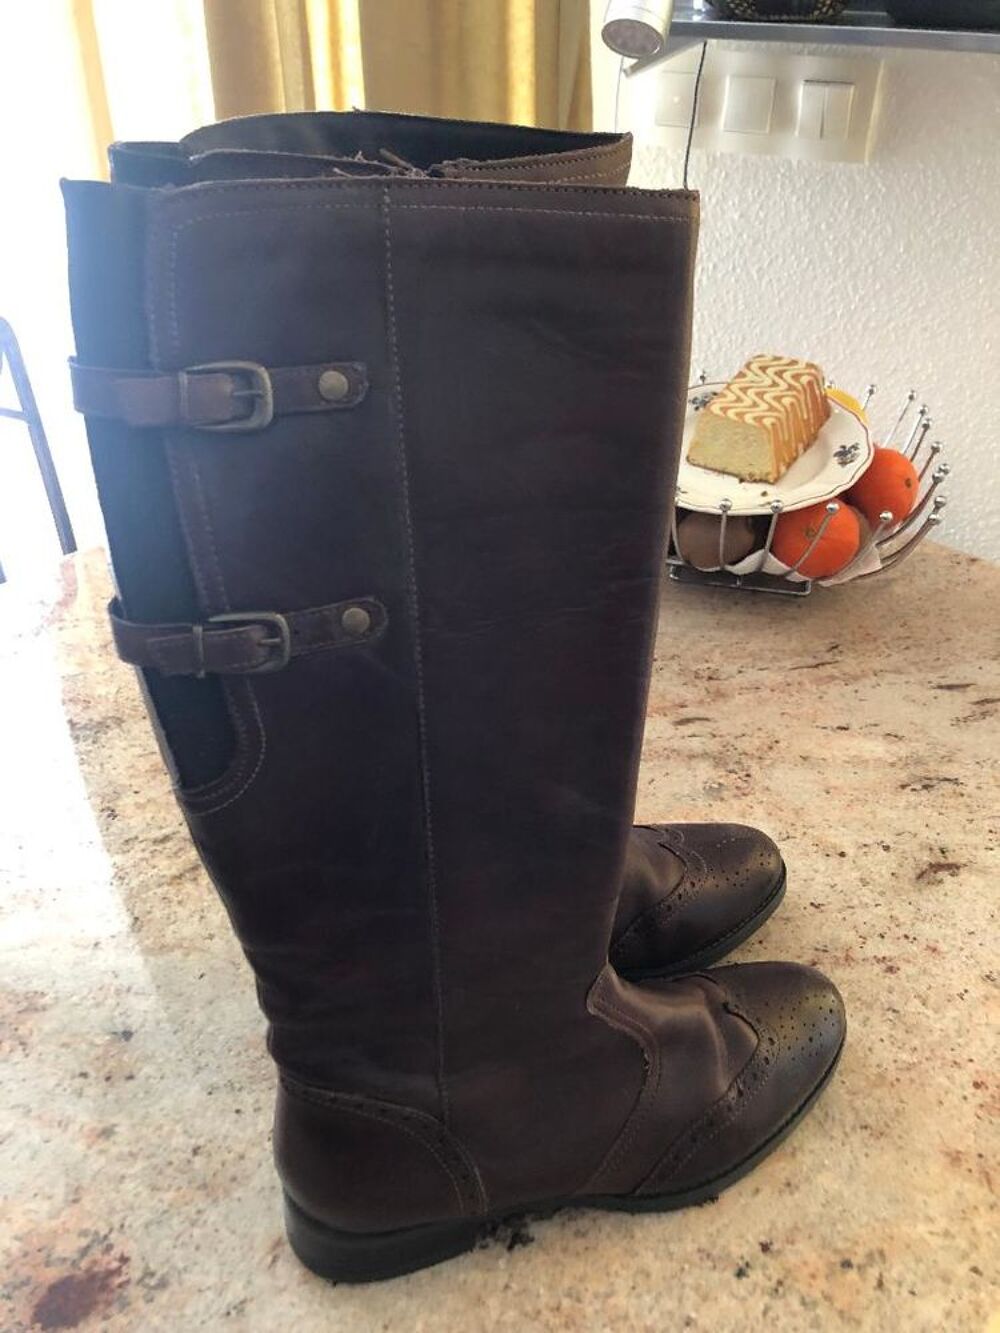 BOTTES Cuir Marron - Tige large T41 Chaussures